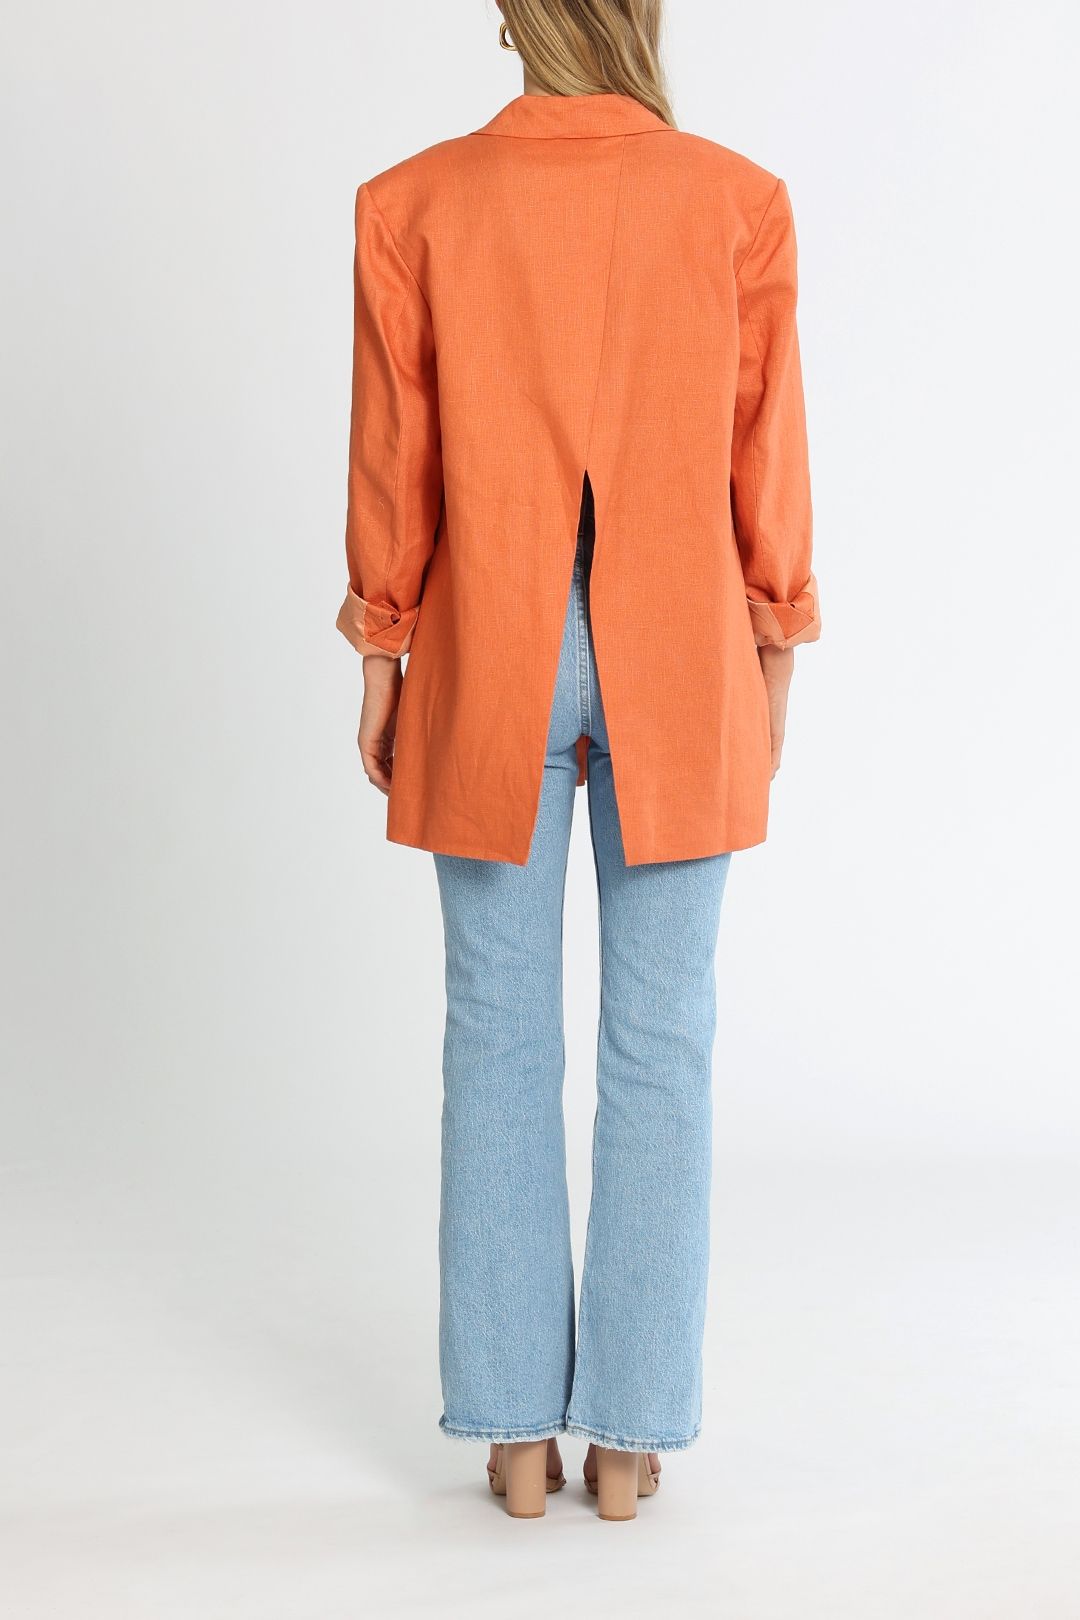 LEO LIN The Faun Blazer Amber Relaxed Fit